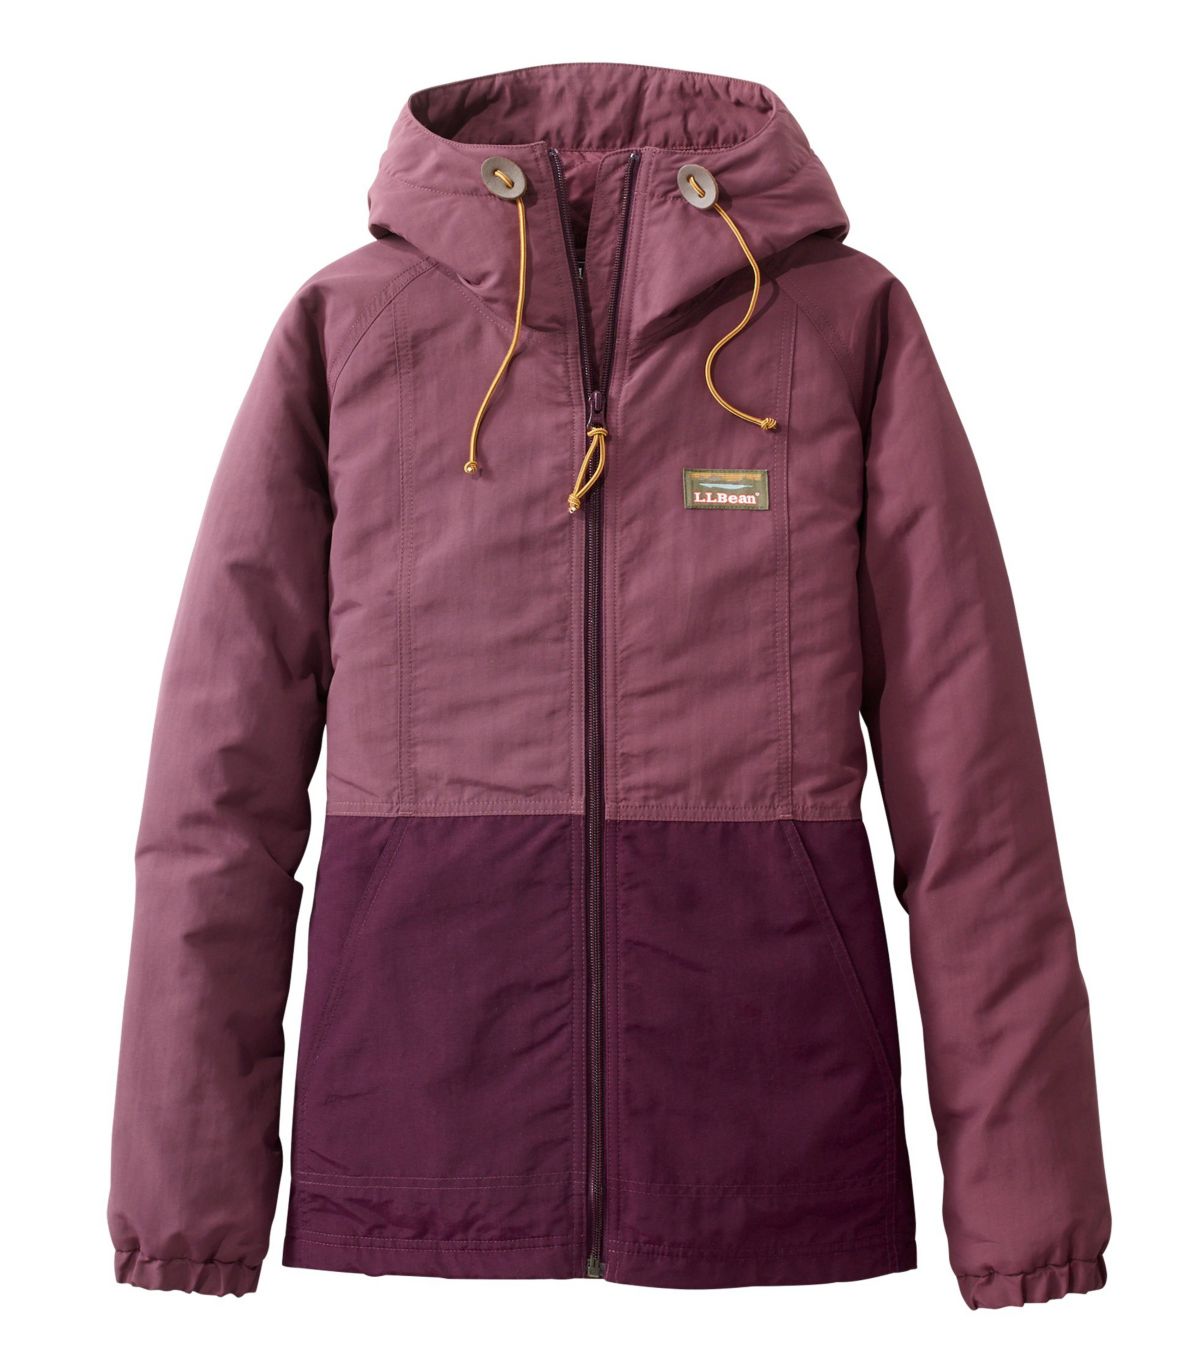 Women's Mountain Classic Insulated Jacket, Colorblock at L.L. Bean